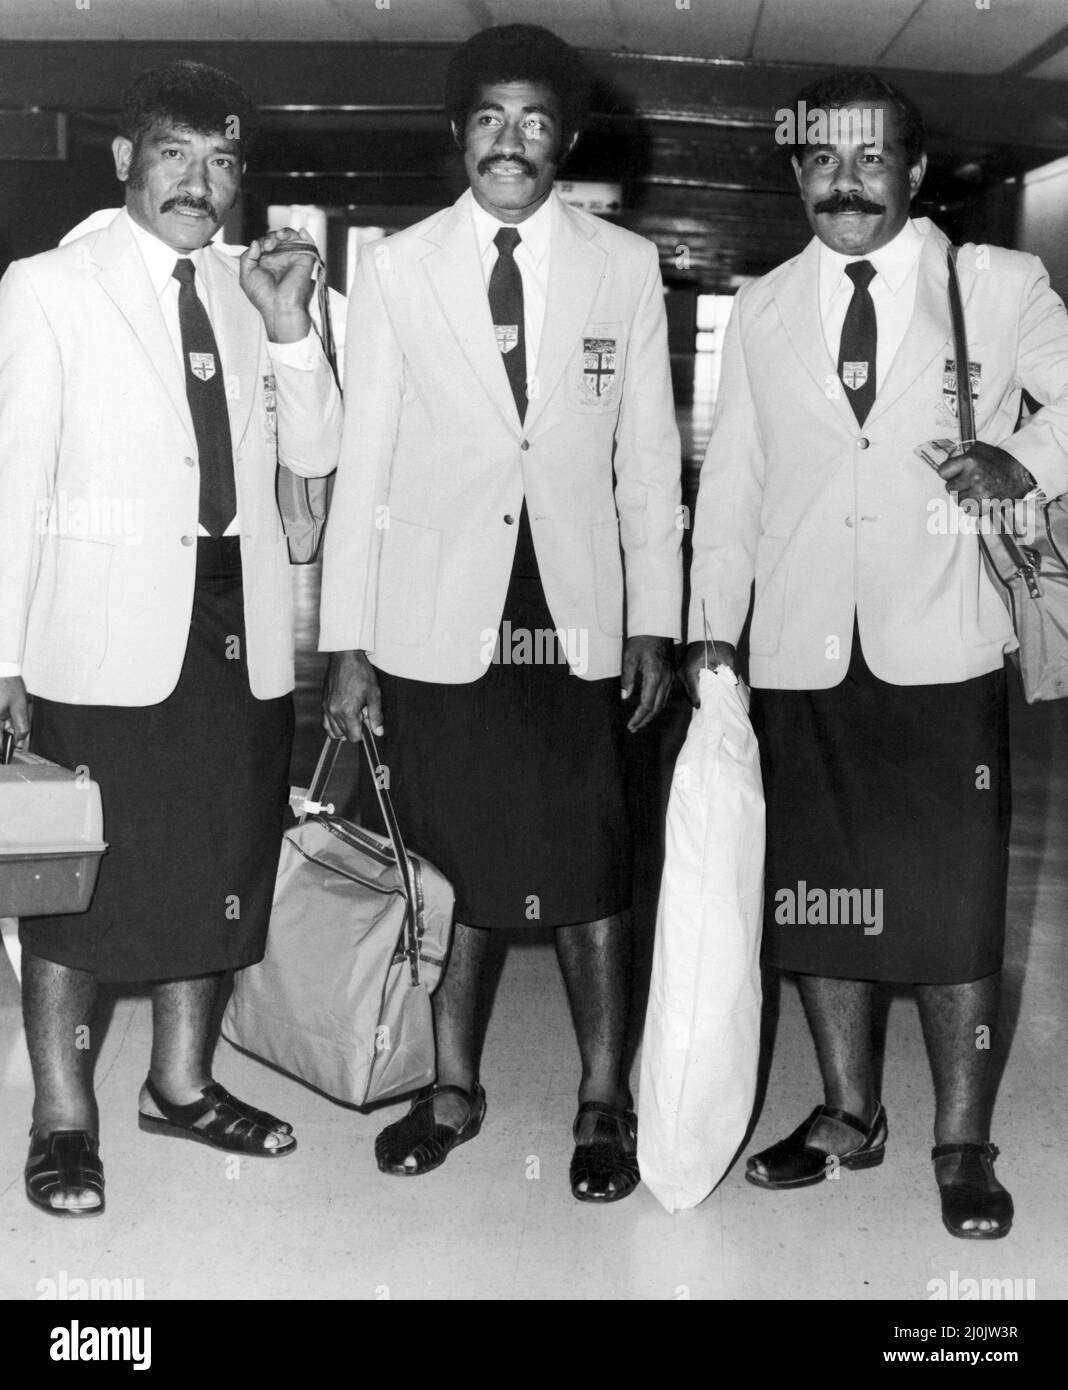 Fiji's cricket team arriving at Heathrow for the ICC Trophy tournament wearing traditional national dress, the sulu.7th June 1982. Stock Photo